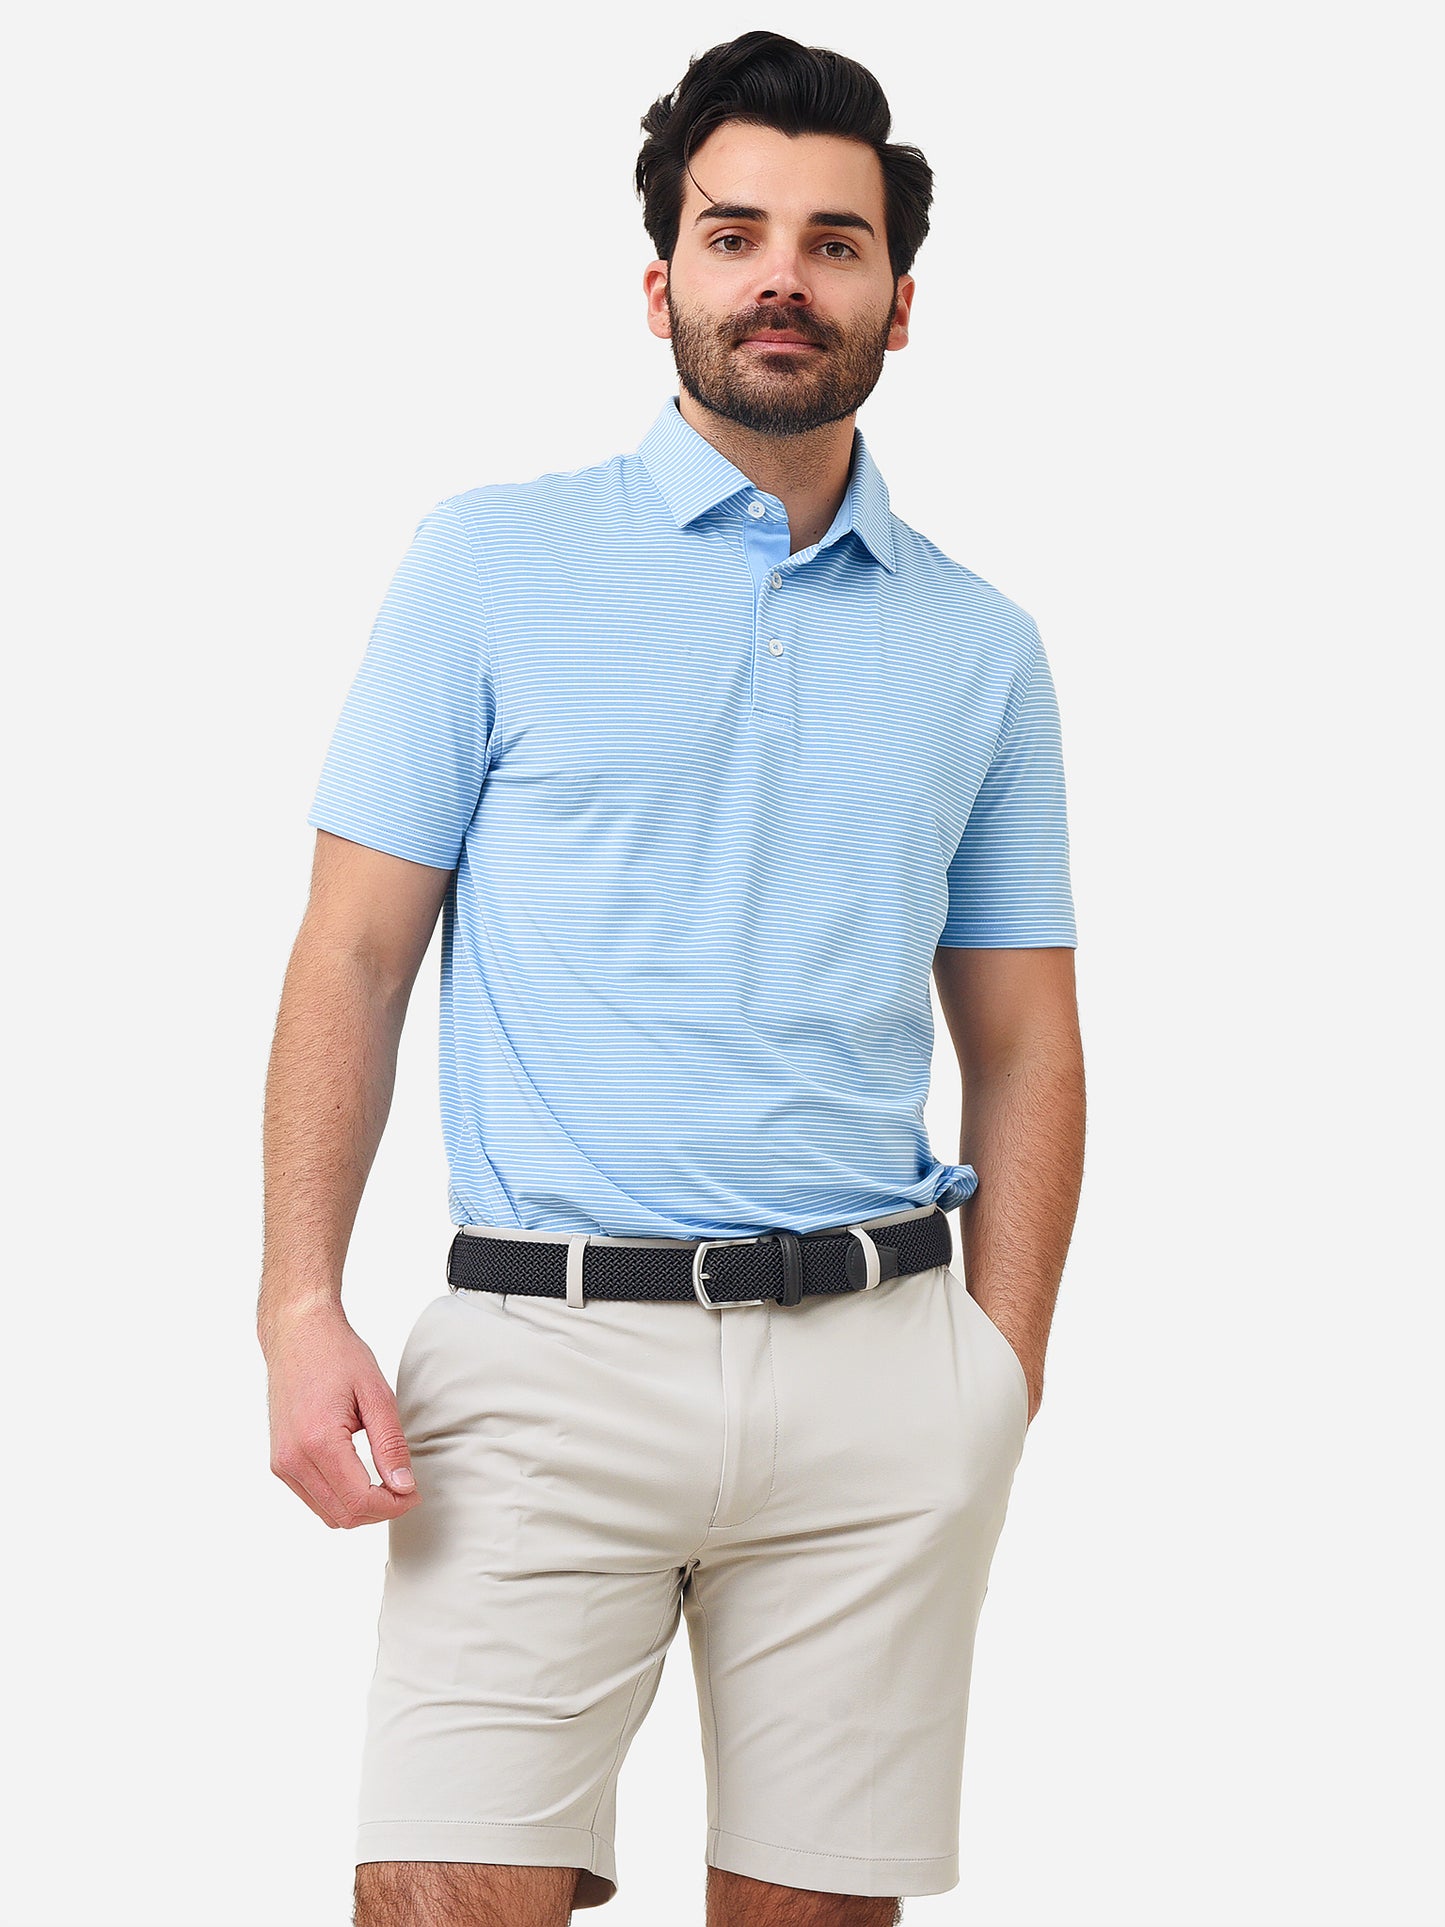 Southern Tide Men's Driver Avast Striped Performance Polo